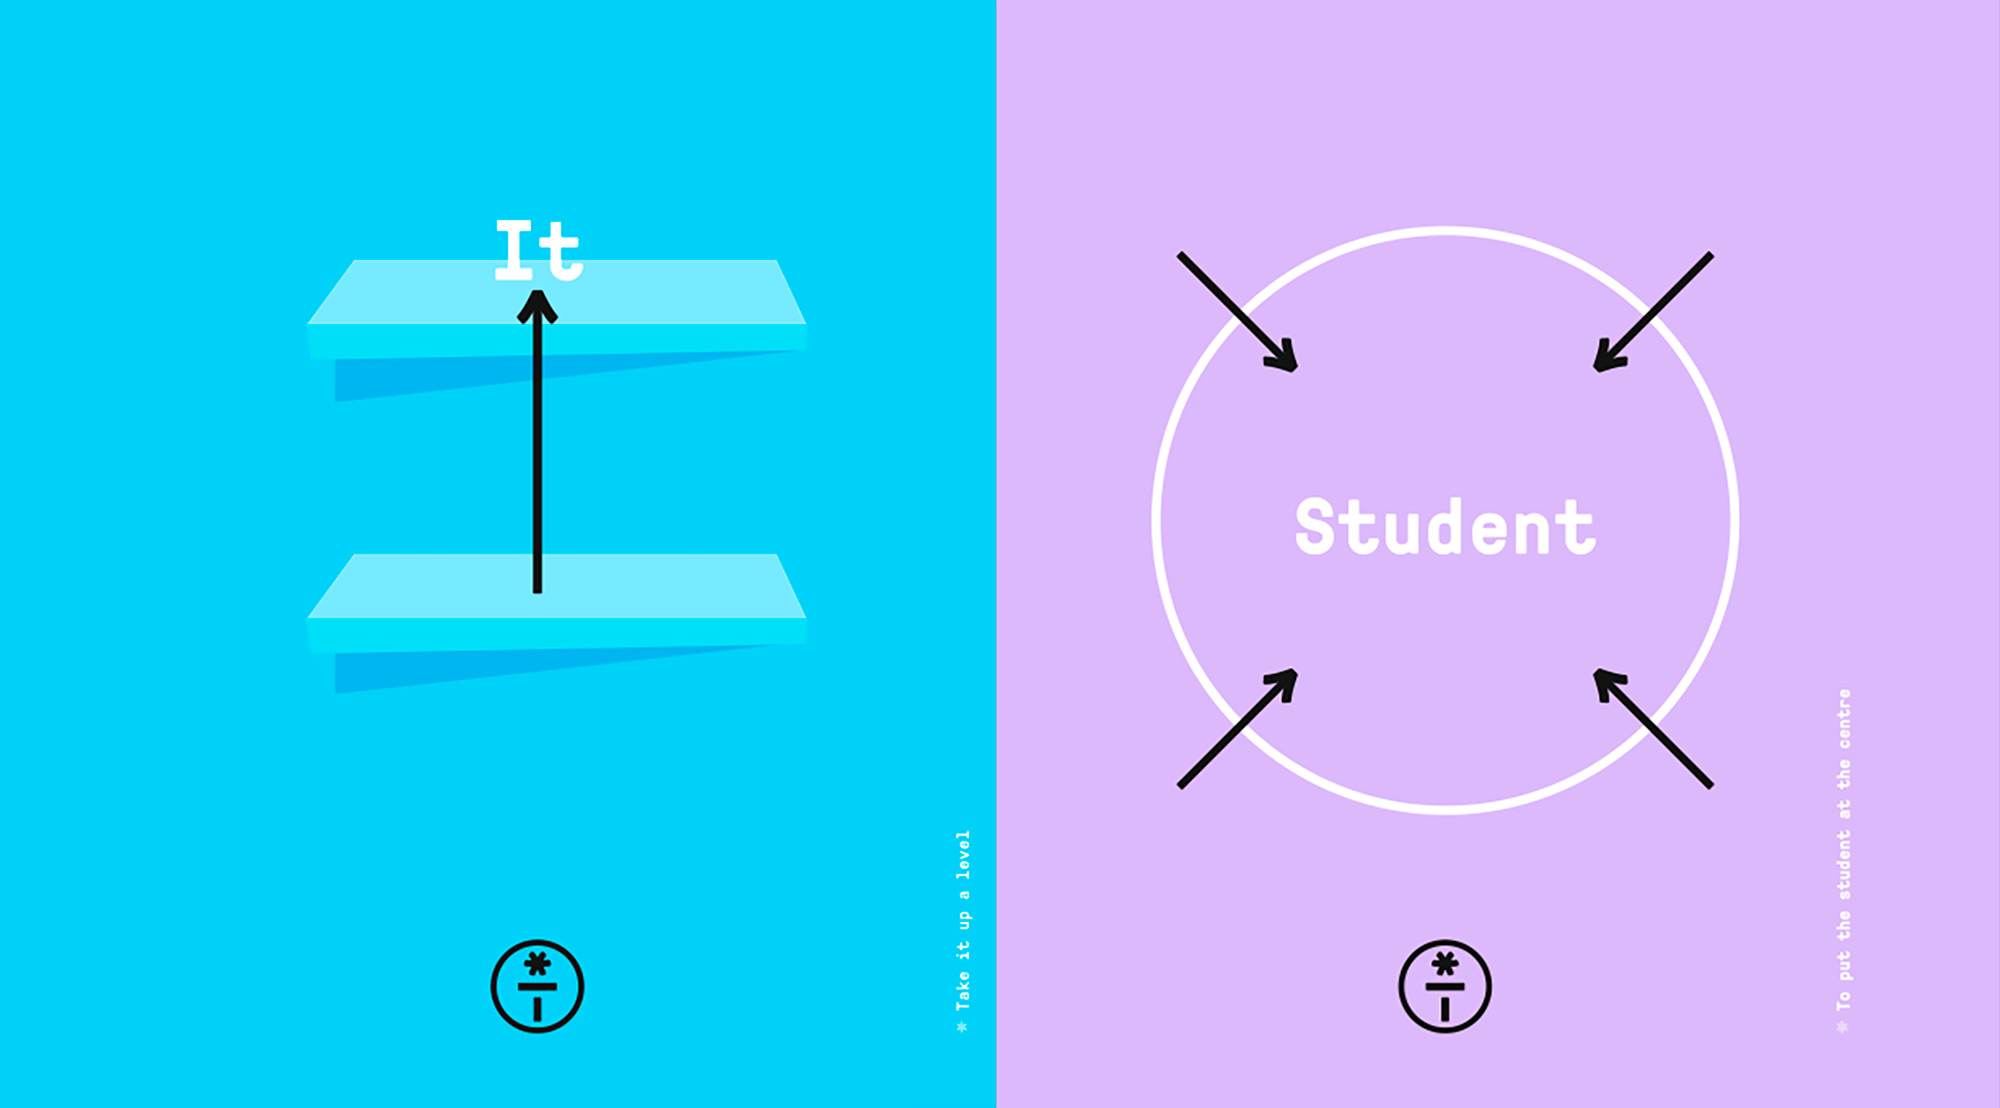 Tlab Iconography, visually representing 'Step it up a level' and 'Put the student at the centre'.